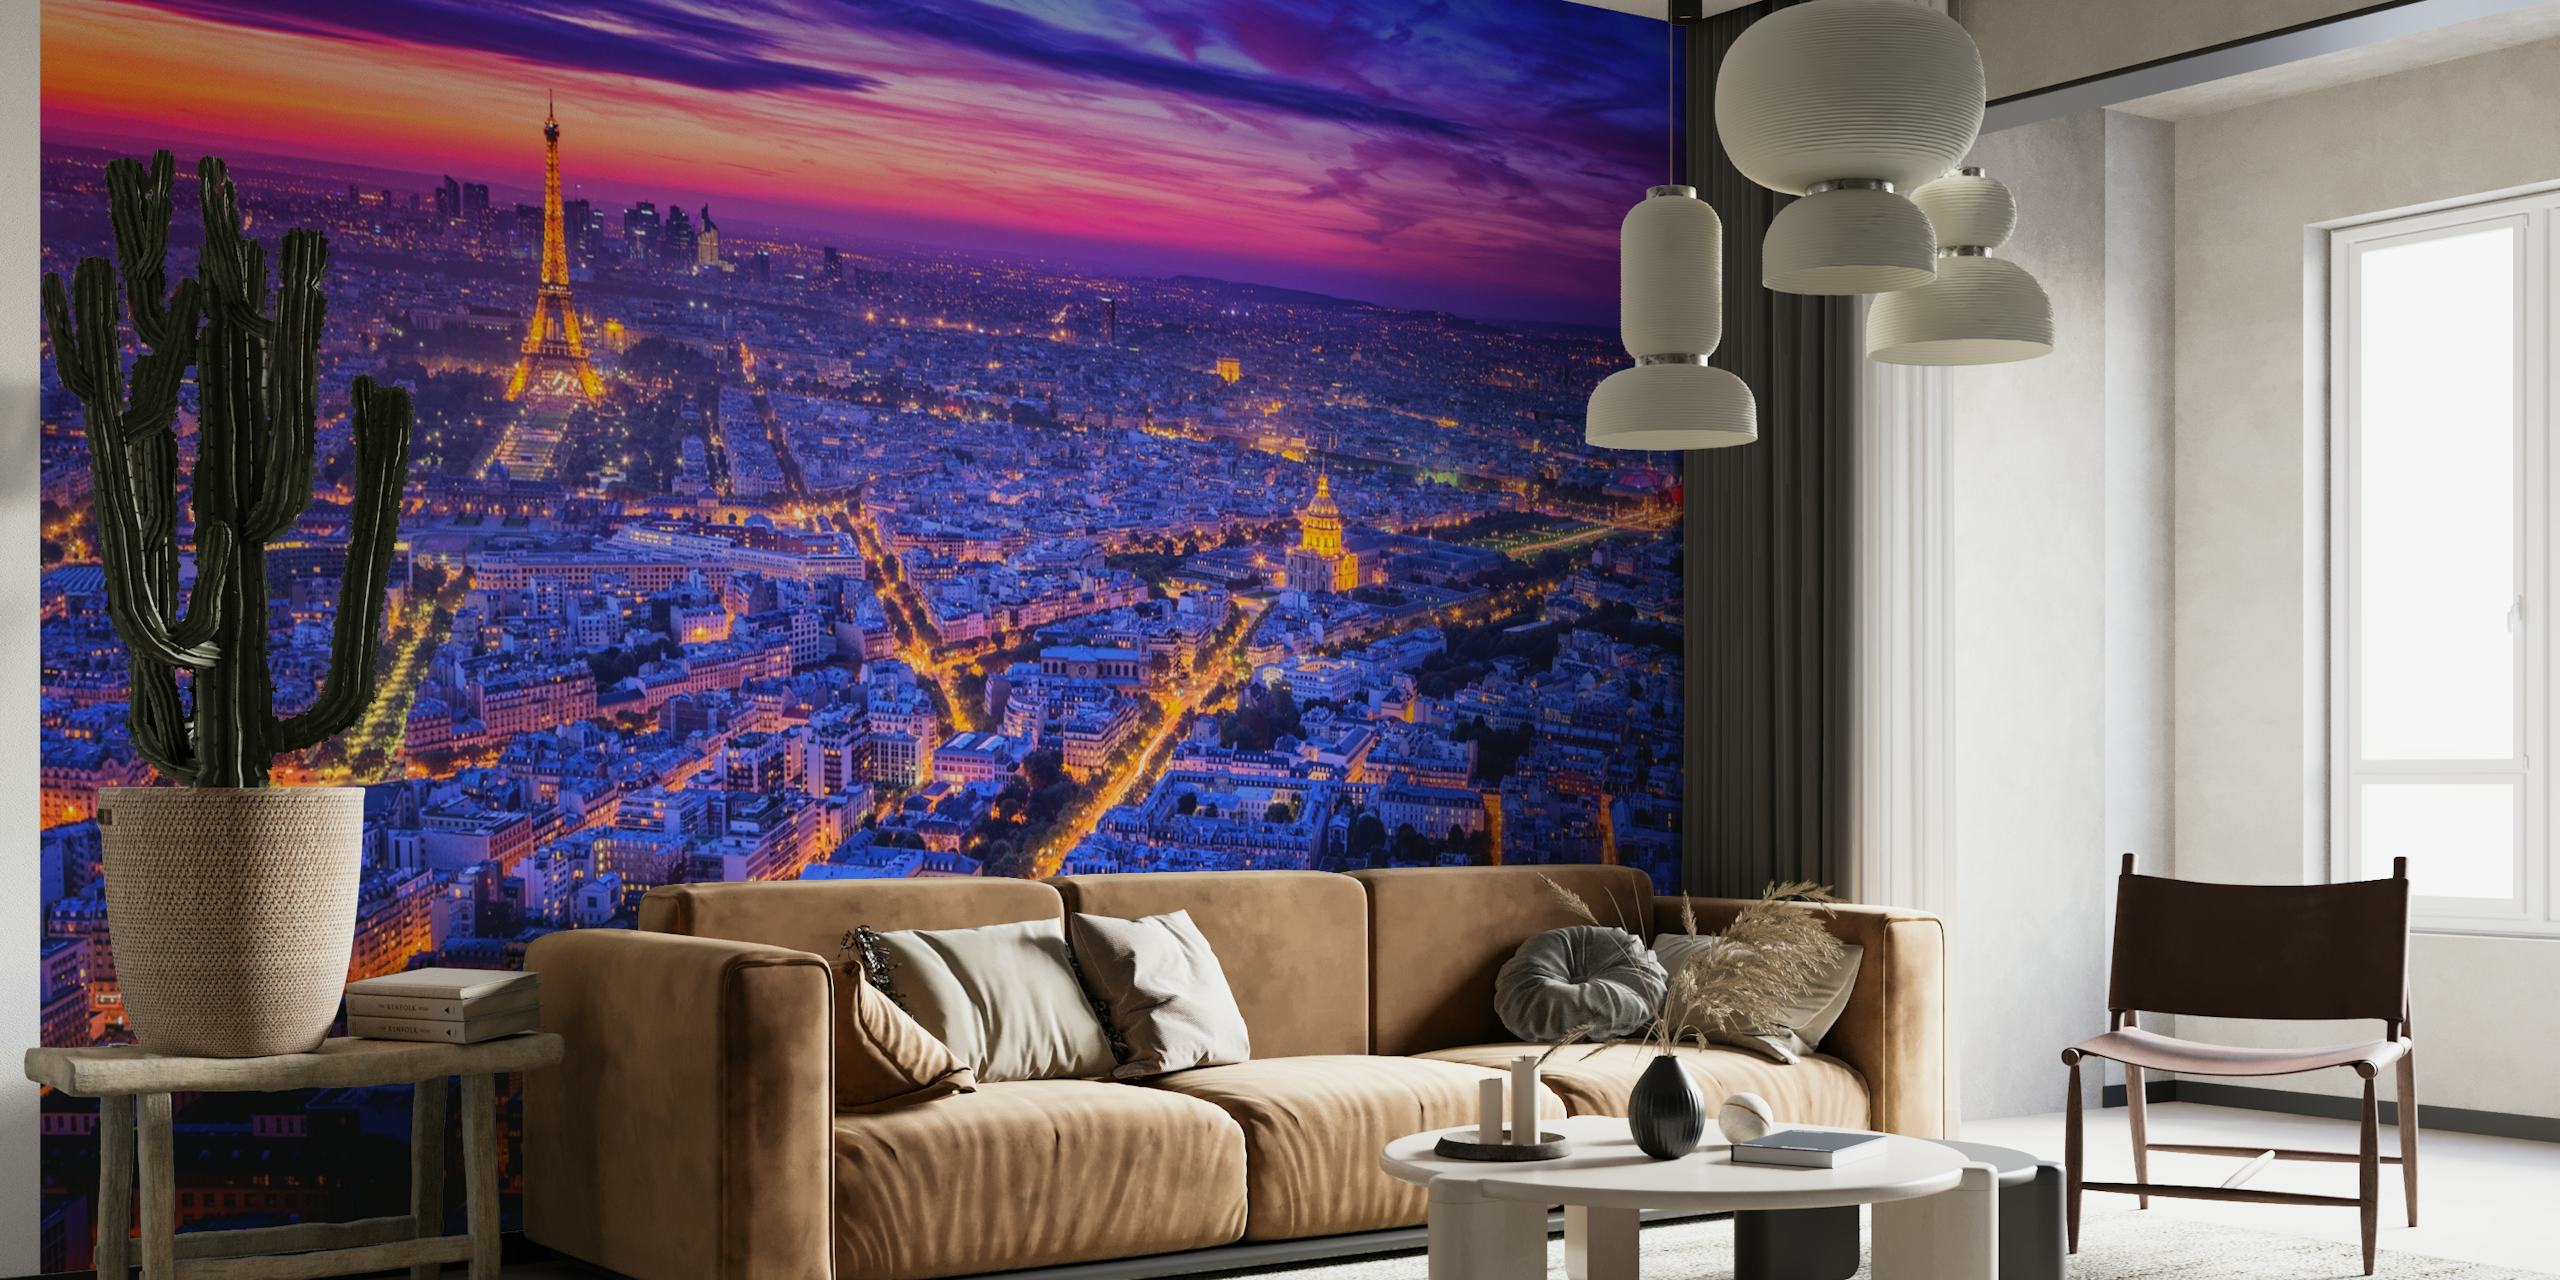 Paris skyline with Eiffel Tower wall mural at sunset/sunrise